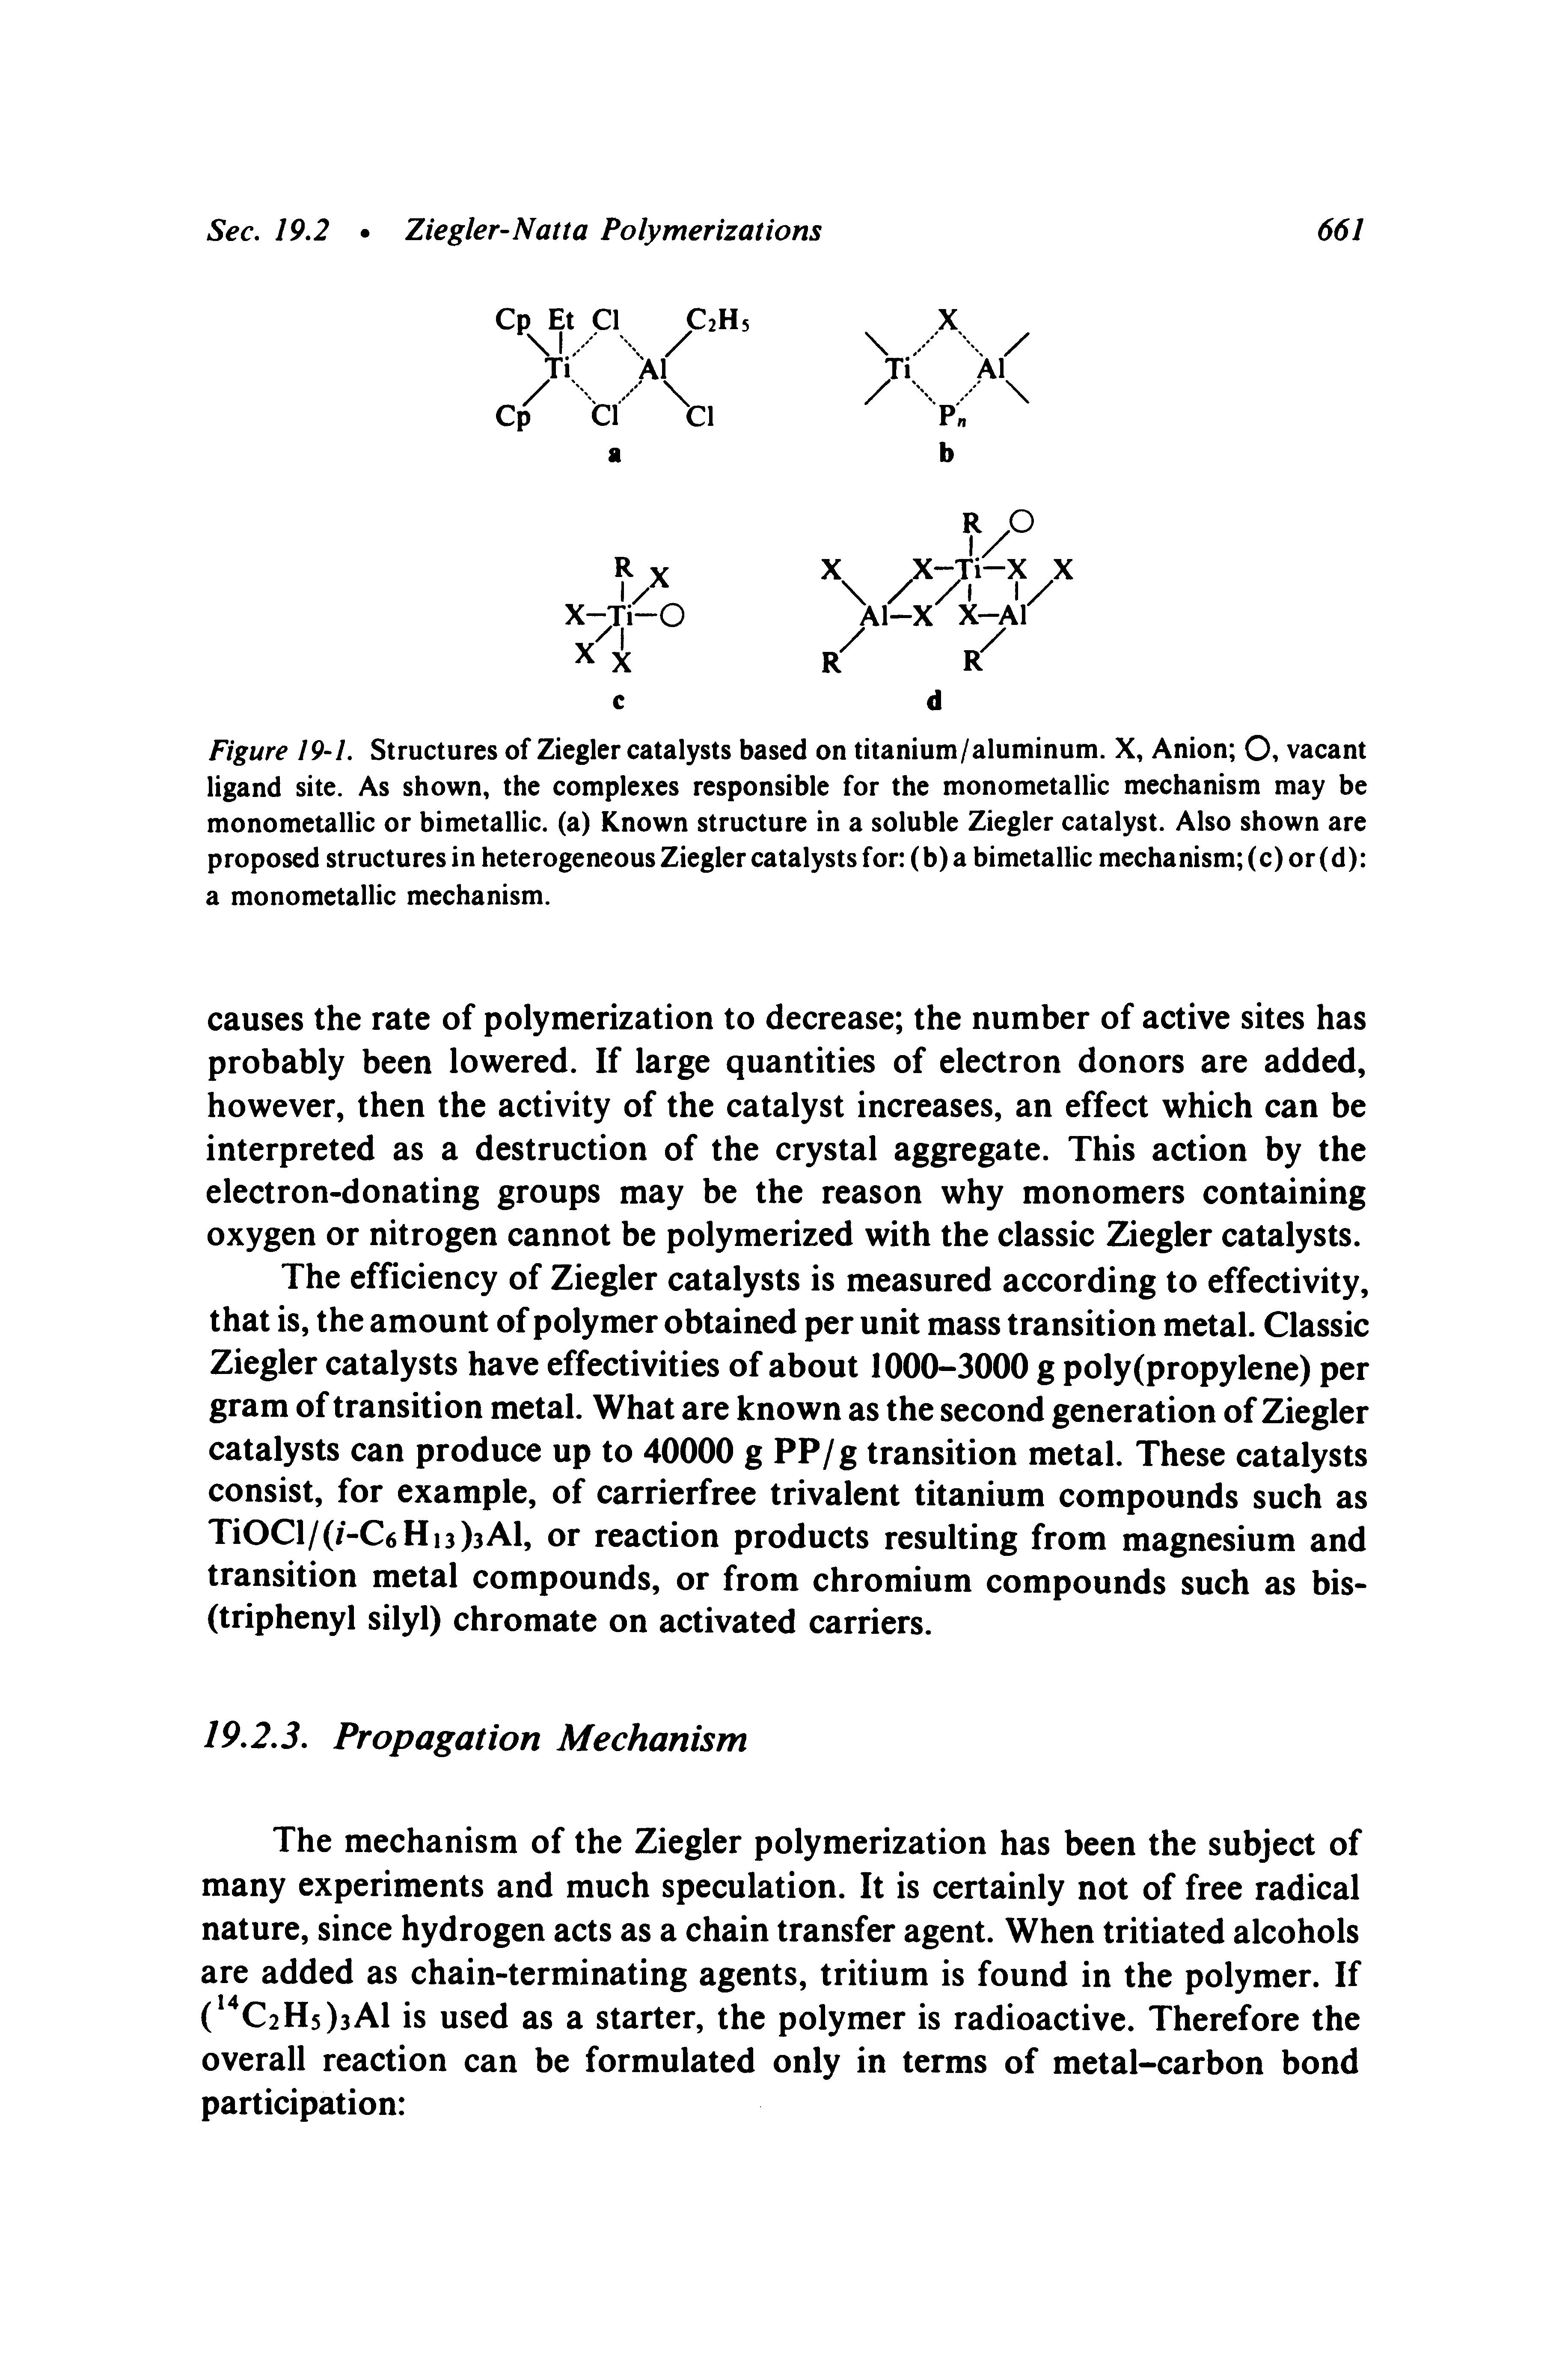 Figure 19-1. Structures of Ziegler catalysts based on titanium/aluminum. X, Anion O, vacant ligand site. As shown, the complexes responsible for the monometallic mechanism may be monometallic or bimetallic, (a) Known structure in a soluble Ziegler catalyst. Also shown are proposed structures in heterogeneous Ziegler catalysts for (b) a bimetallic mechanism (c) or (d) a monometallic mechanism.